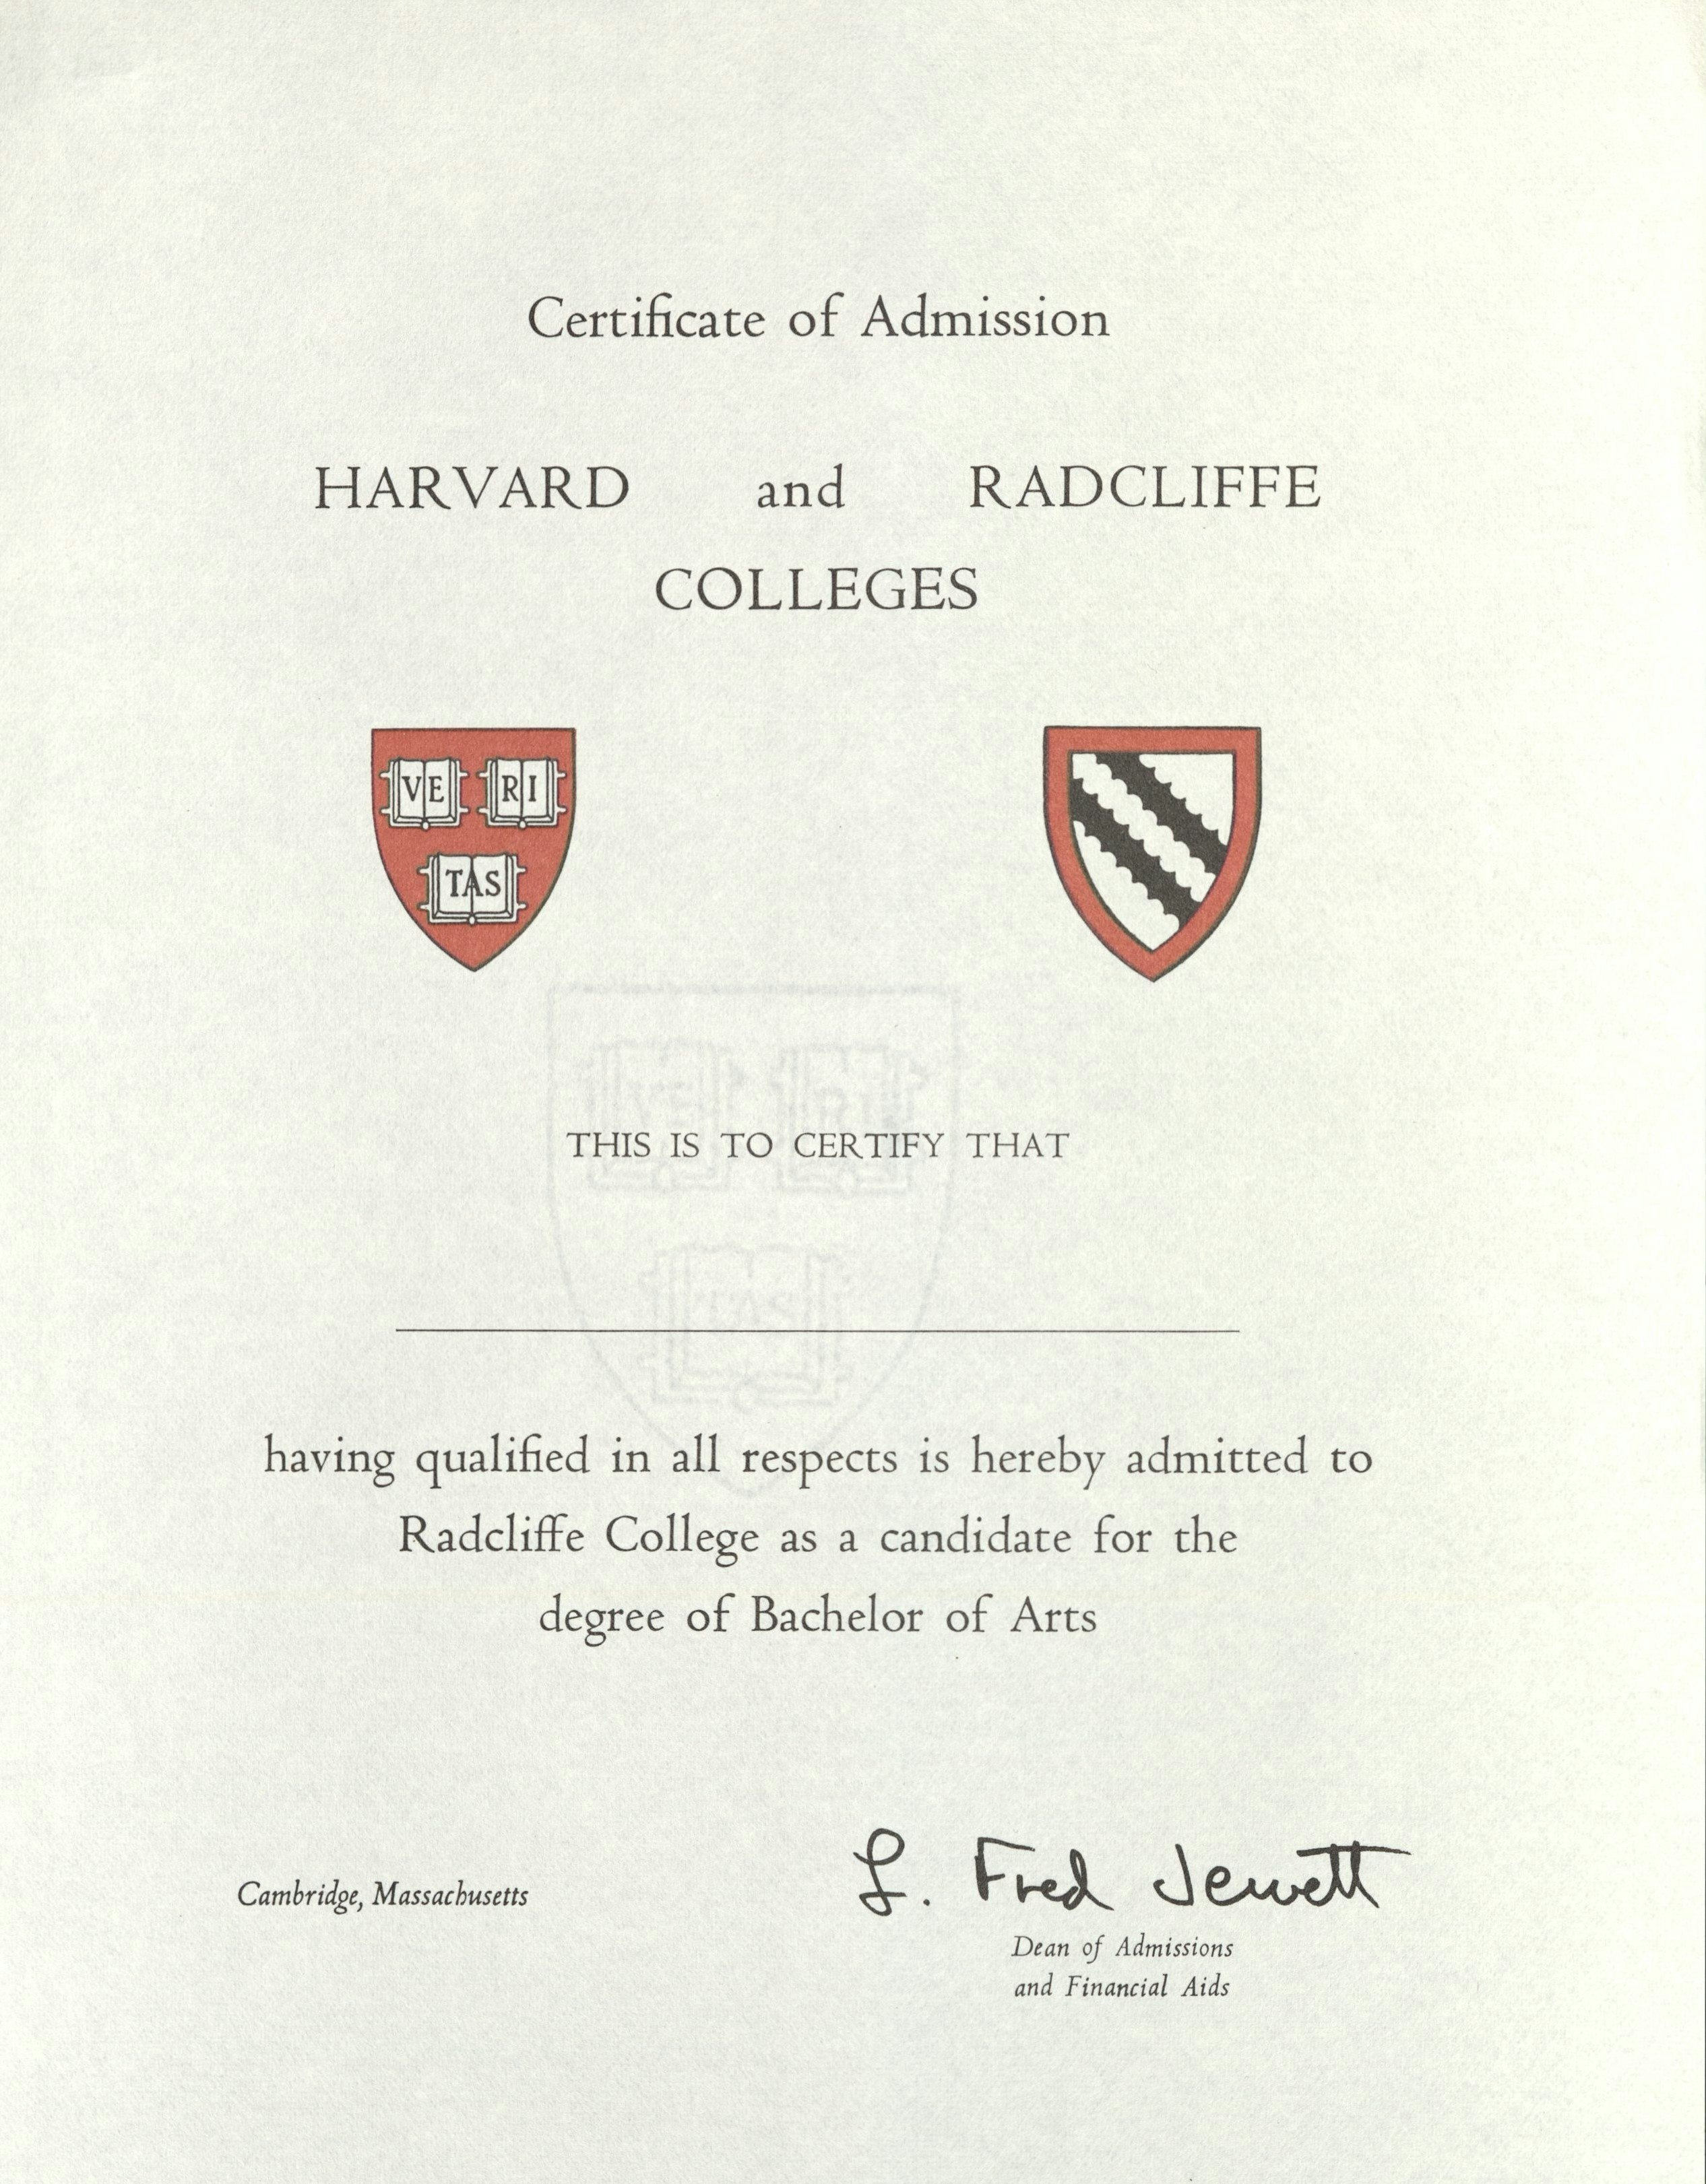 Admissions certificate